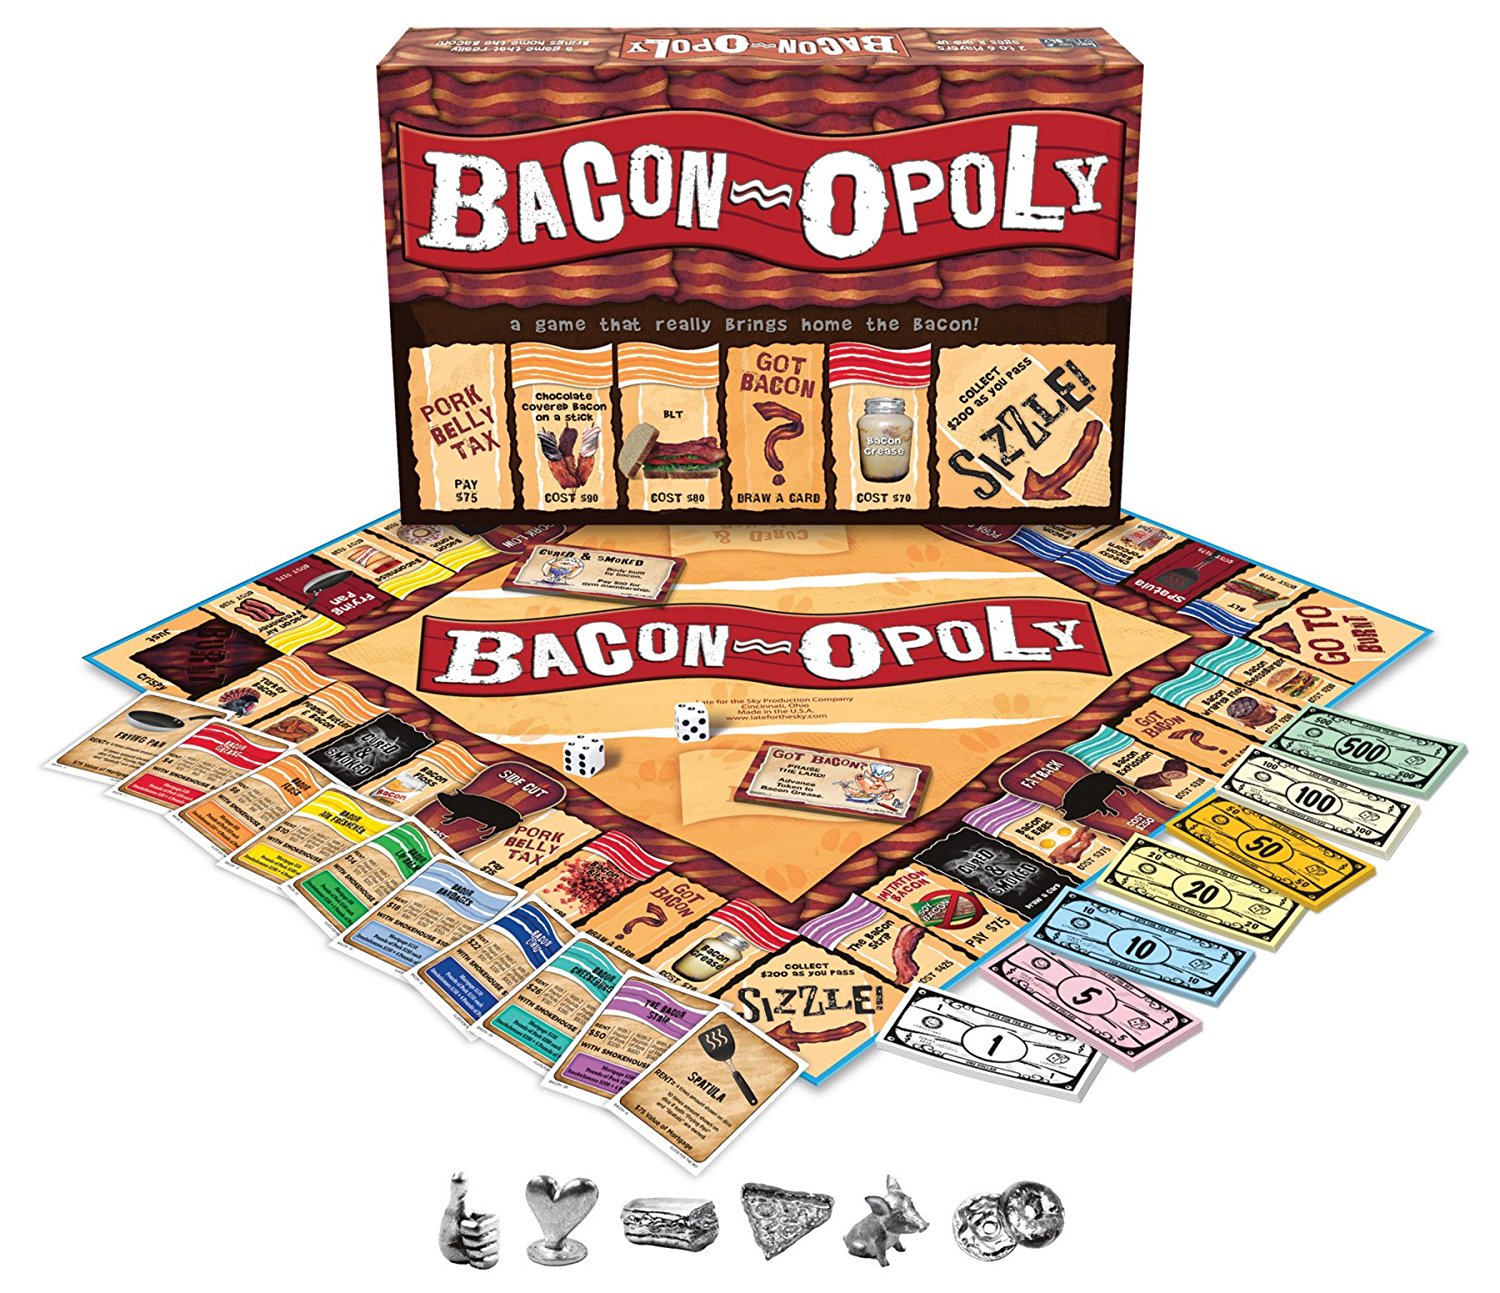 Think Monopoly is Boring? You Haven't Played Bacon Monopoly